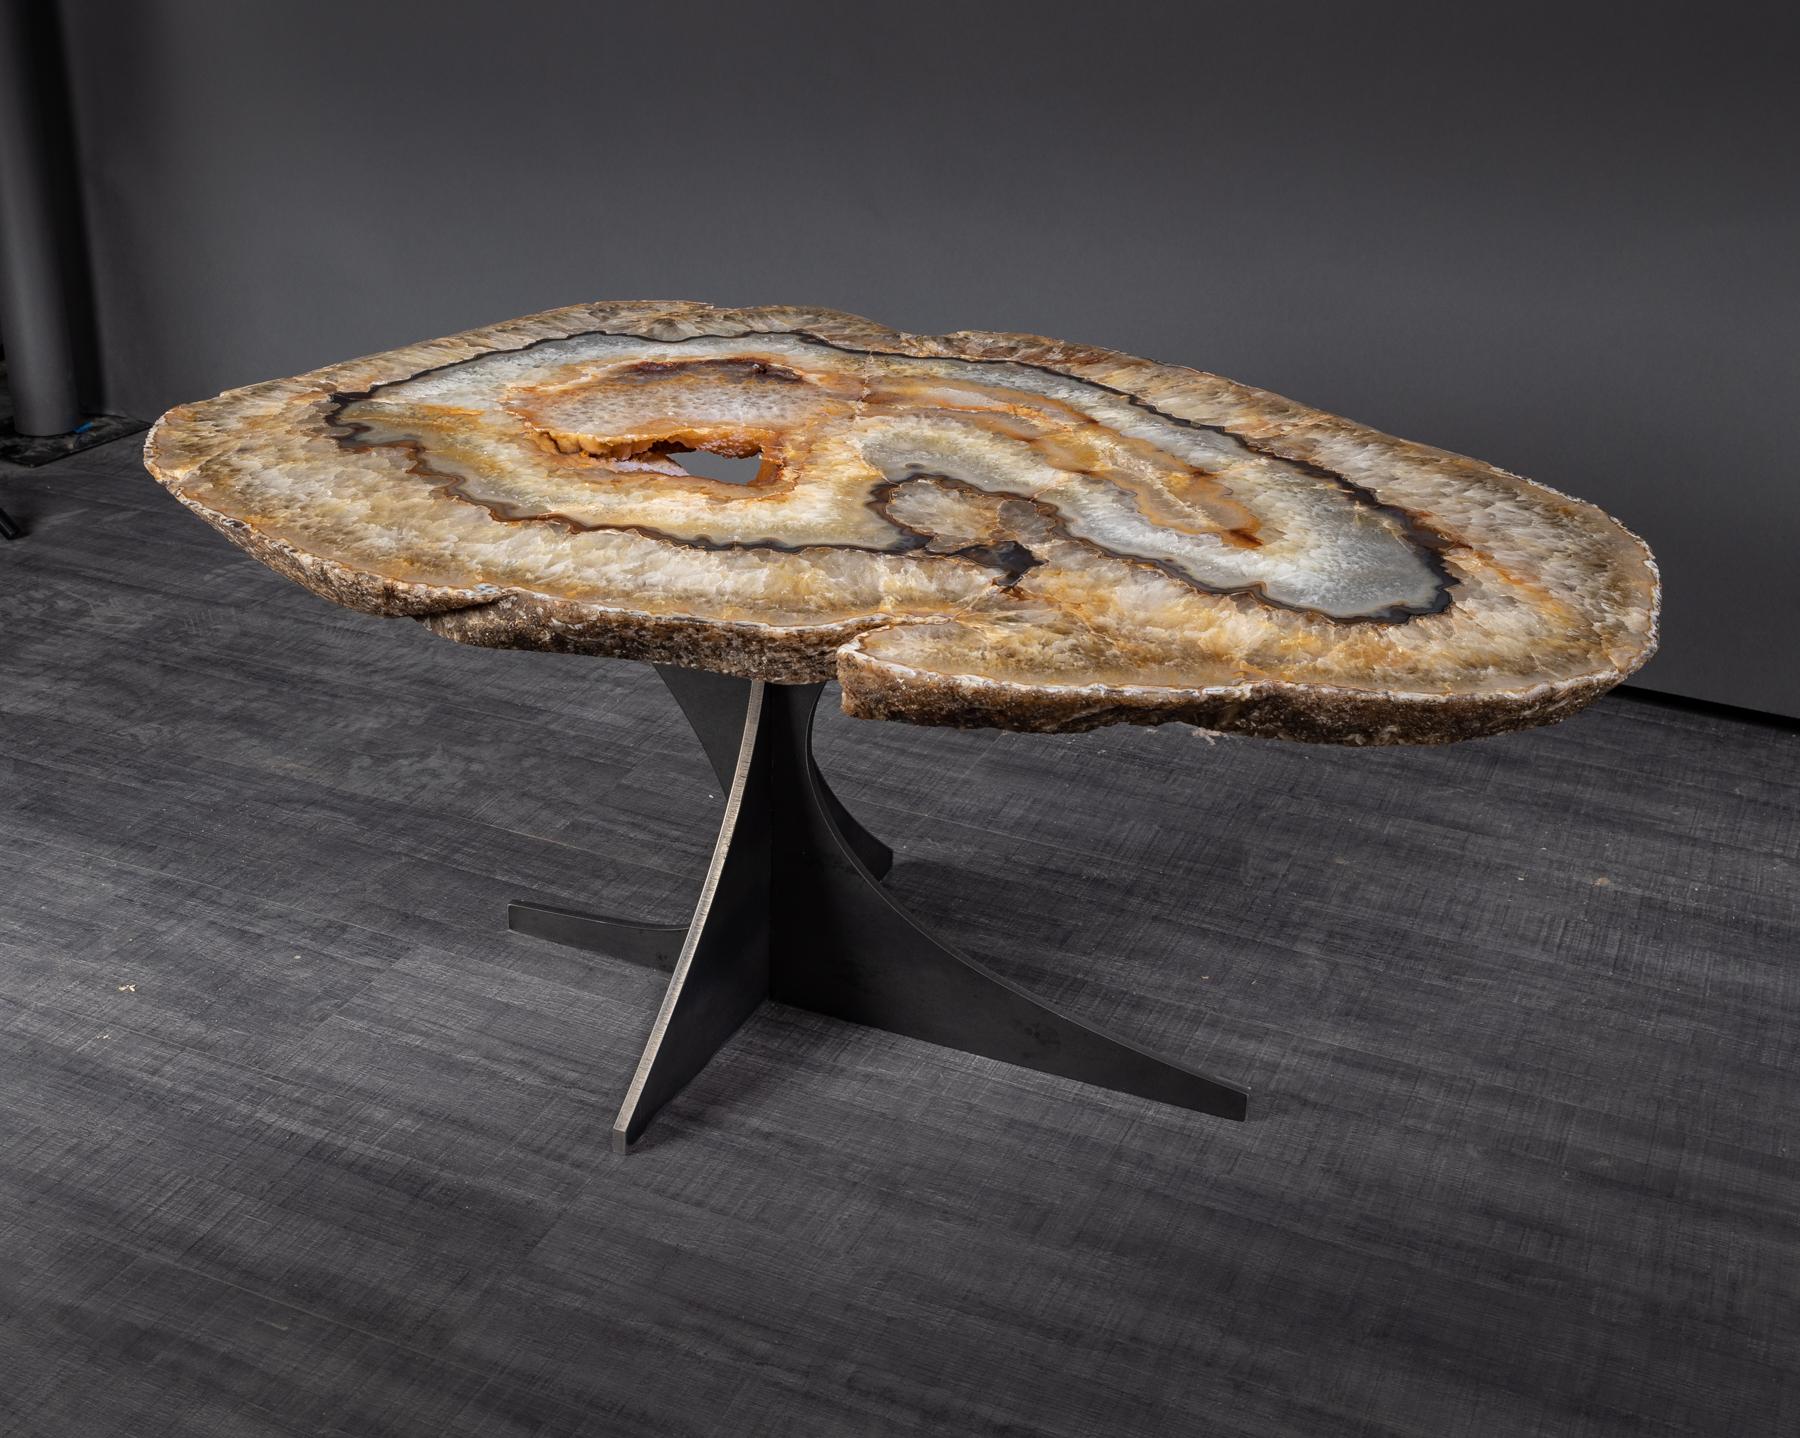 This agate side table or cocktail table is from Brazil and has a combination of colors with hints of beige, brown and white. Agates are formed in rounded nodules, which are sliced open to bring out the internal pattern hidden in the stone. Their